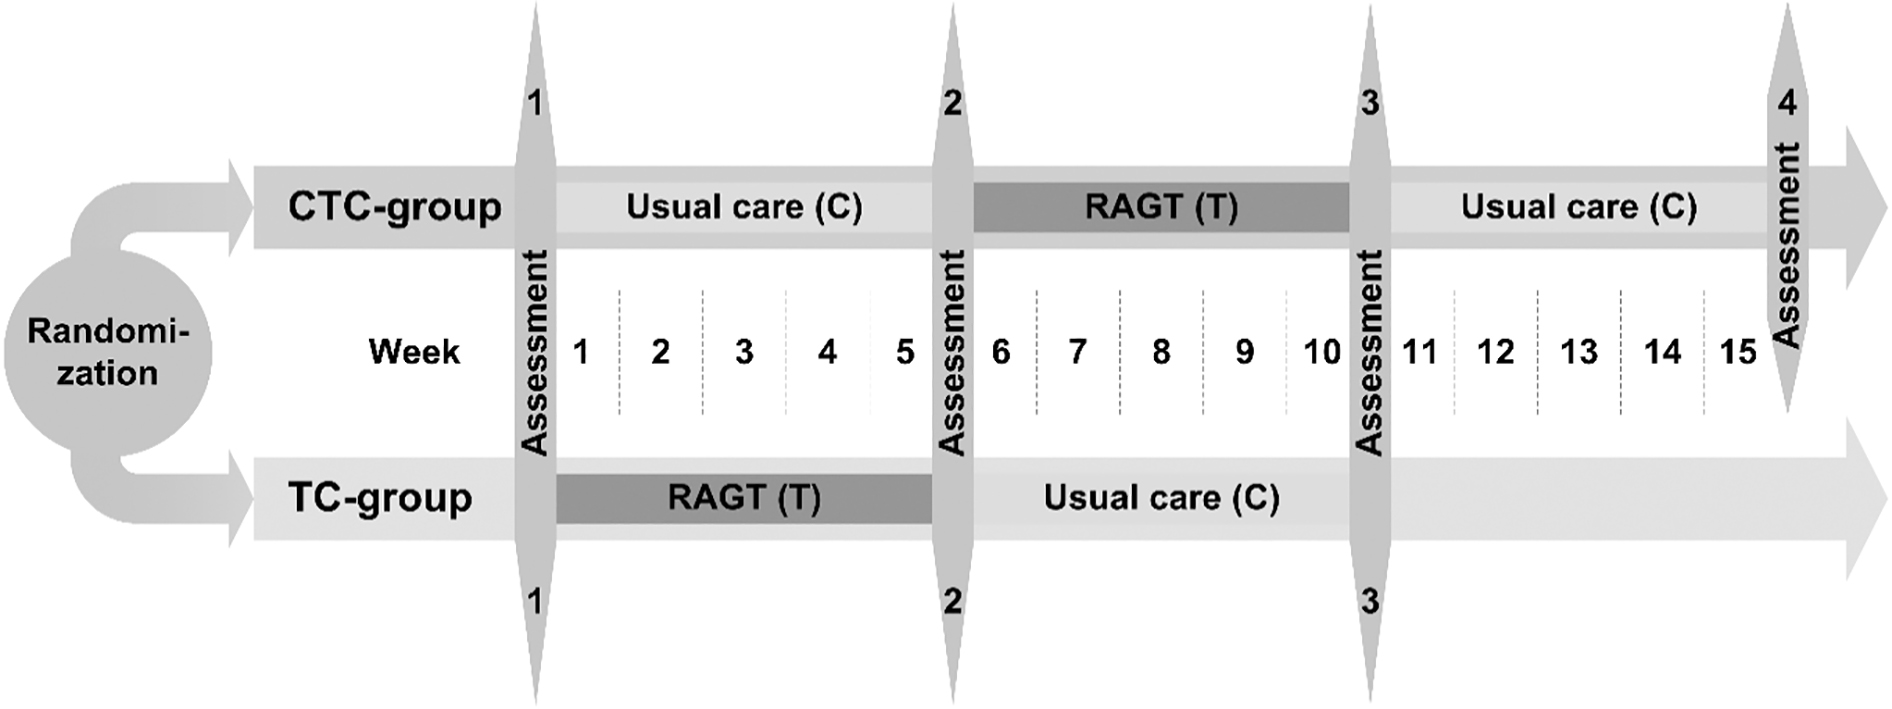 Overview of the outcome measures and the measurement time points per group. Children randomized to the CTC-group with the intervention sequence usual care/robot-assisted gait training (RAGT)/usual care were measured at four different time points within 16 weeks. Children randomized to the TC-group underwent the intervention sequence RAGT/usual care and were measured at three different time points within 11 weeks. Differences regarding intervention time and numbers of measurement time points were deliberately chosen to reduce the burden on children and families as much as possible.